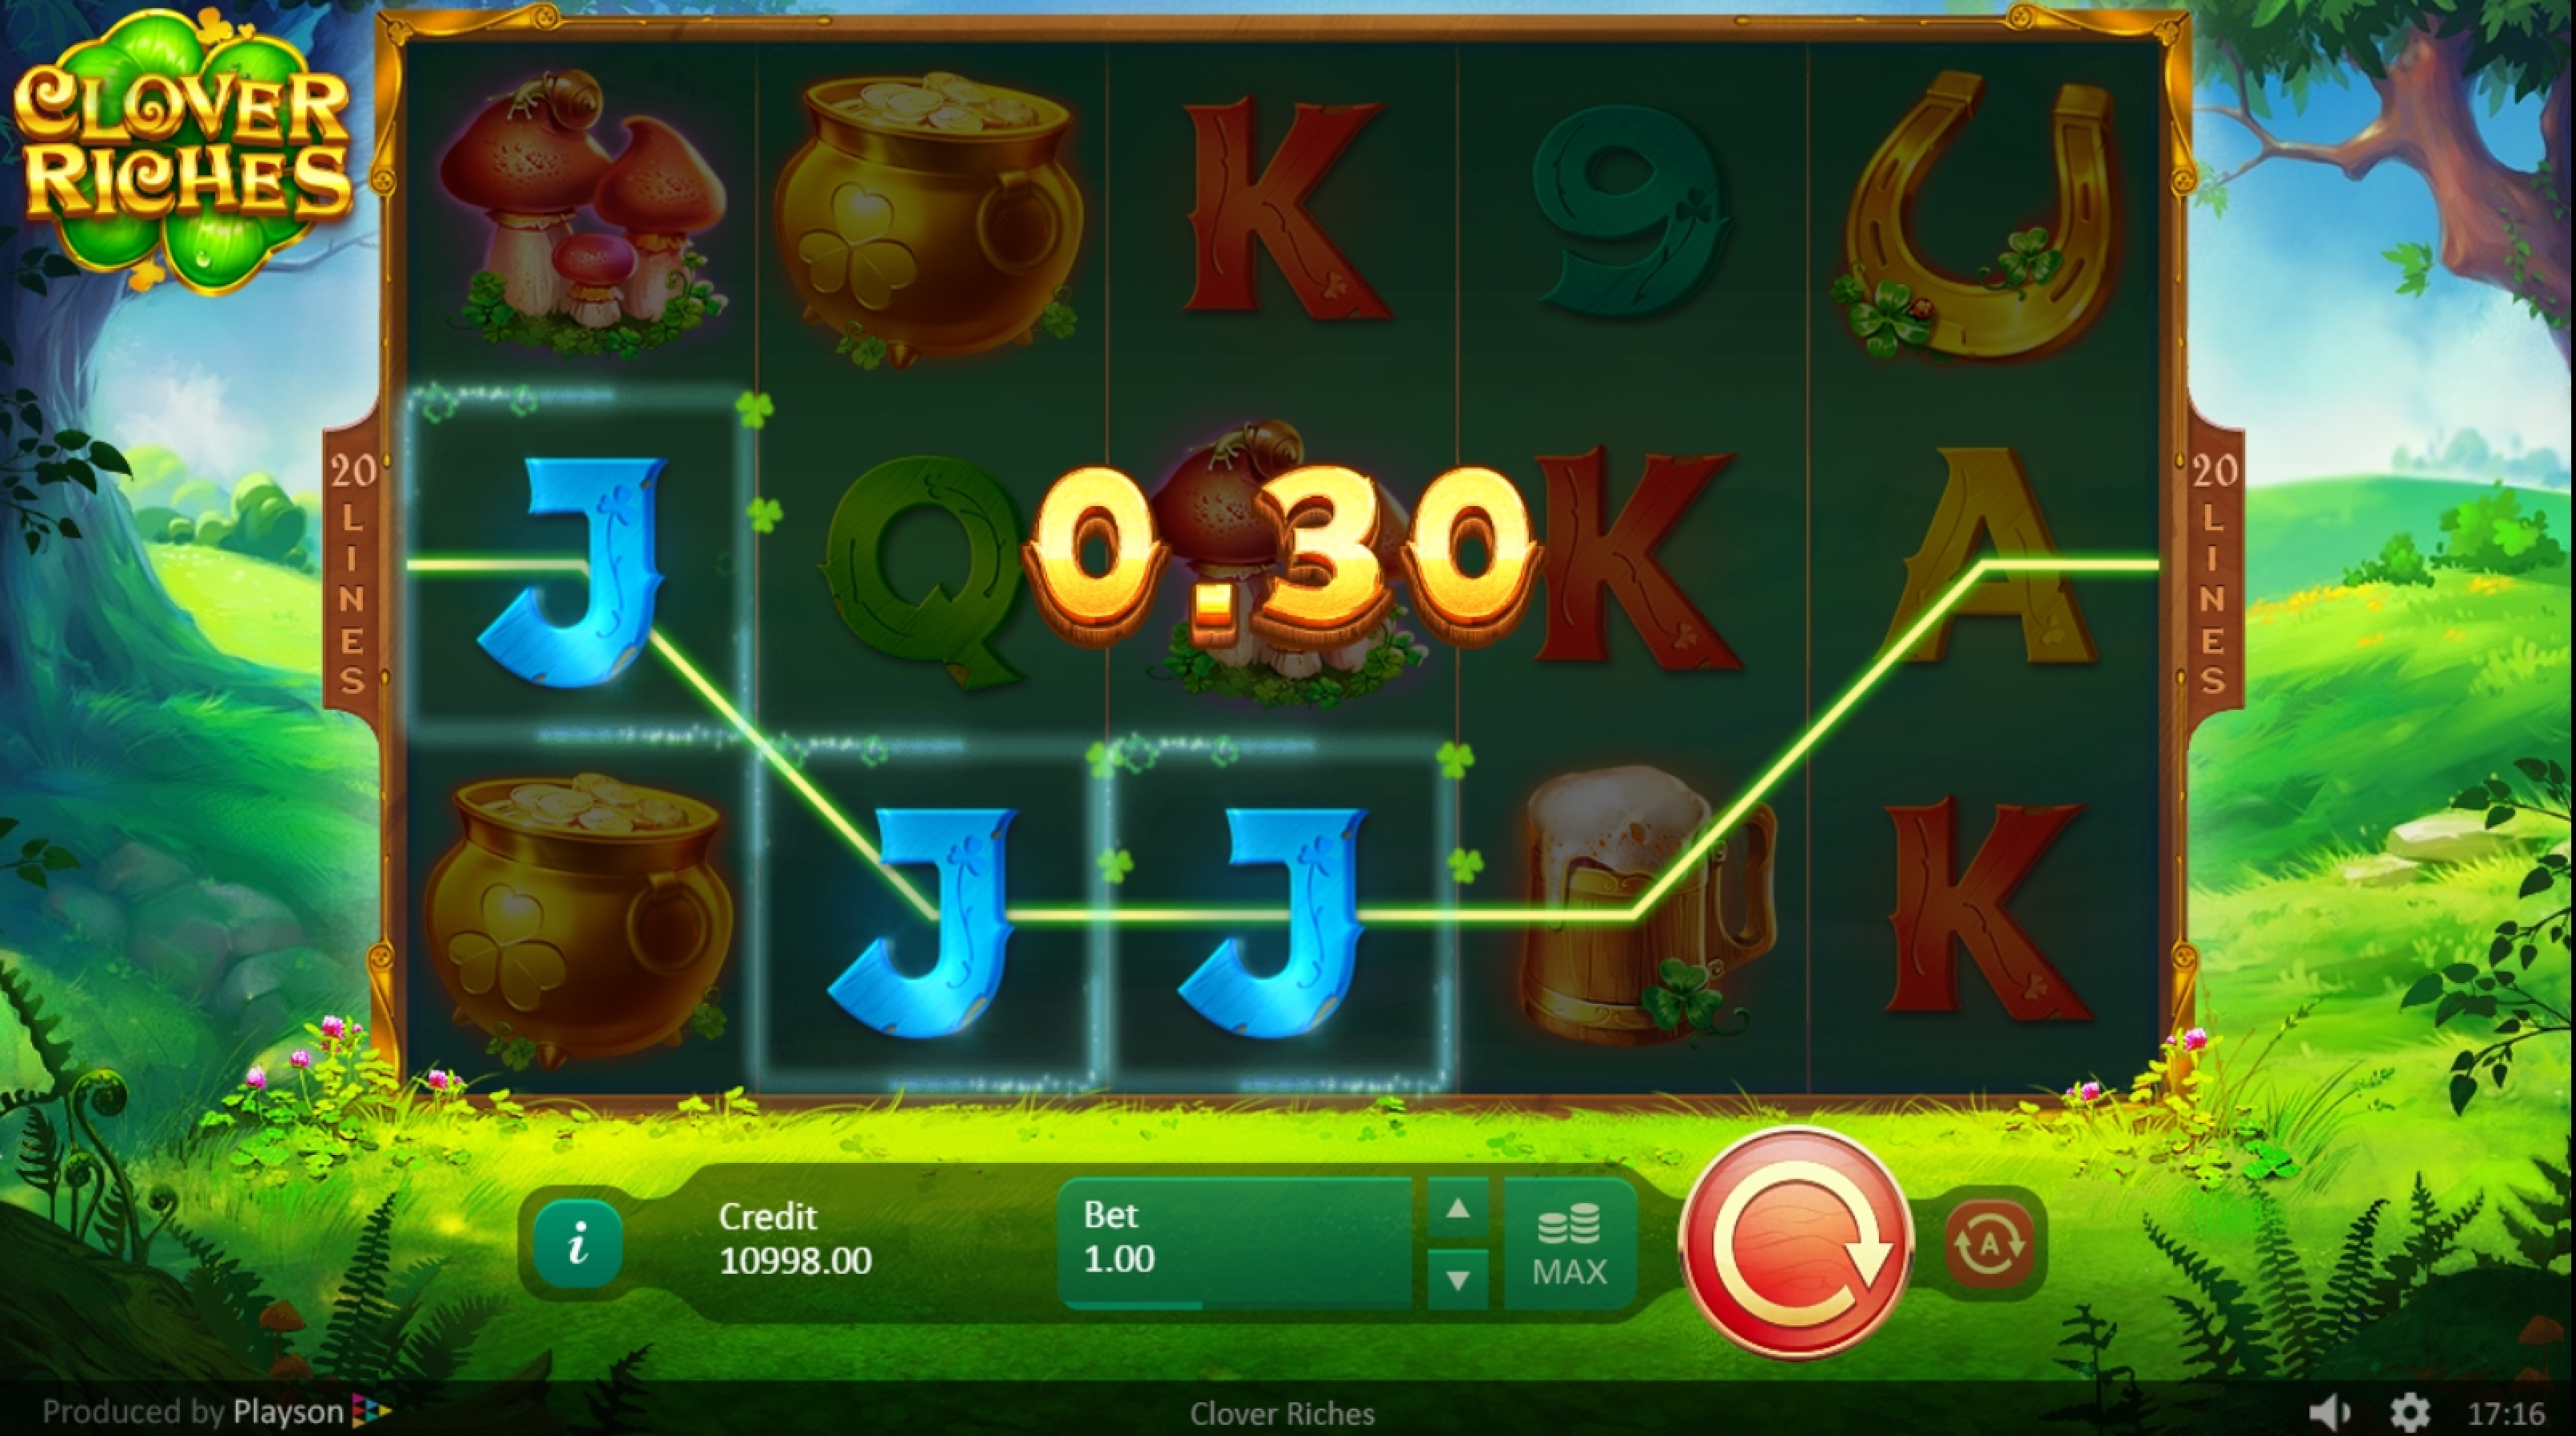 Win Money in Clover Riches Free Slot Game by Playson